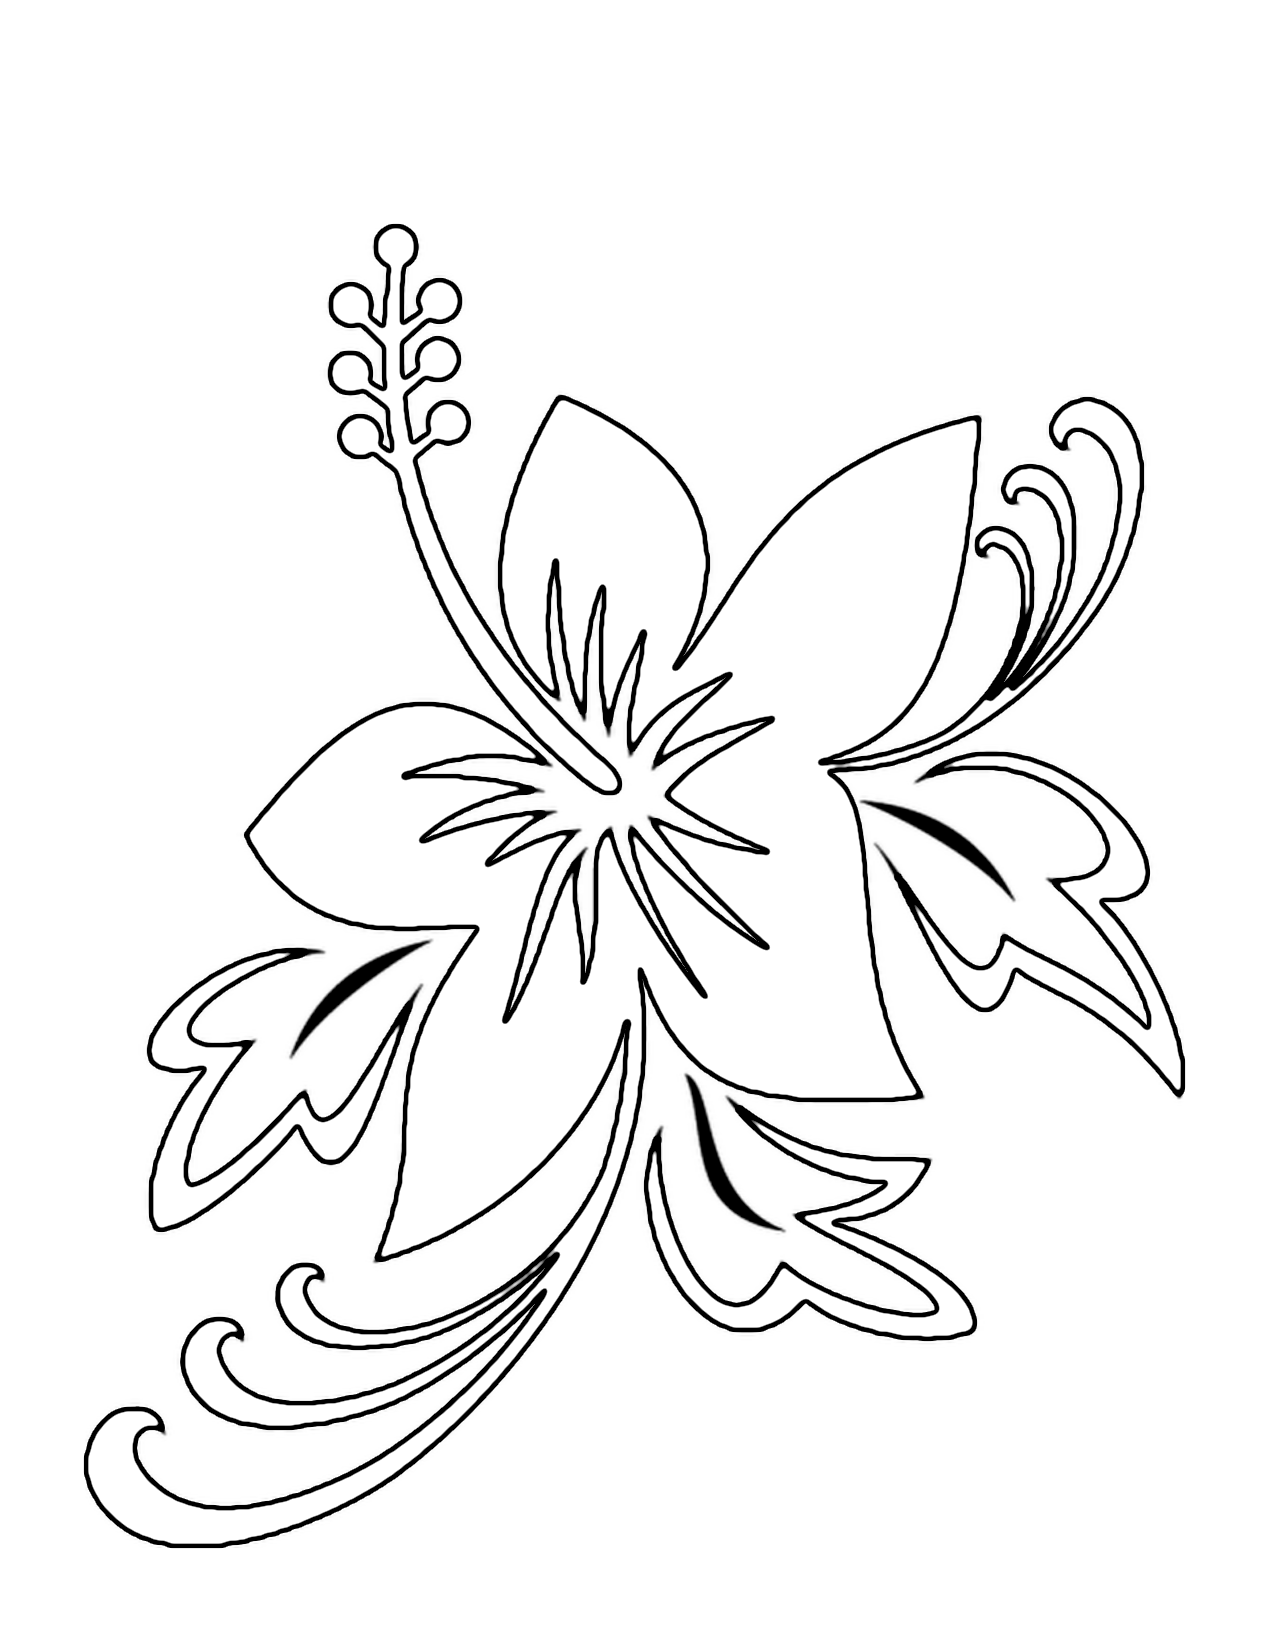 Tropical Hawaiian Flower Coloring Page | smilecoloring.